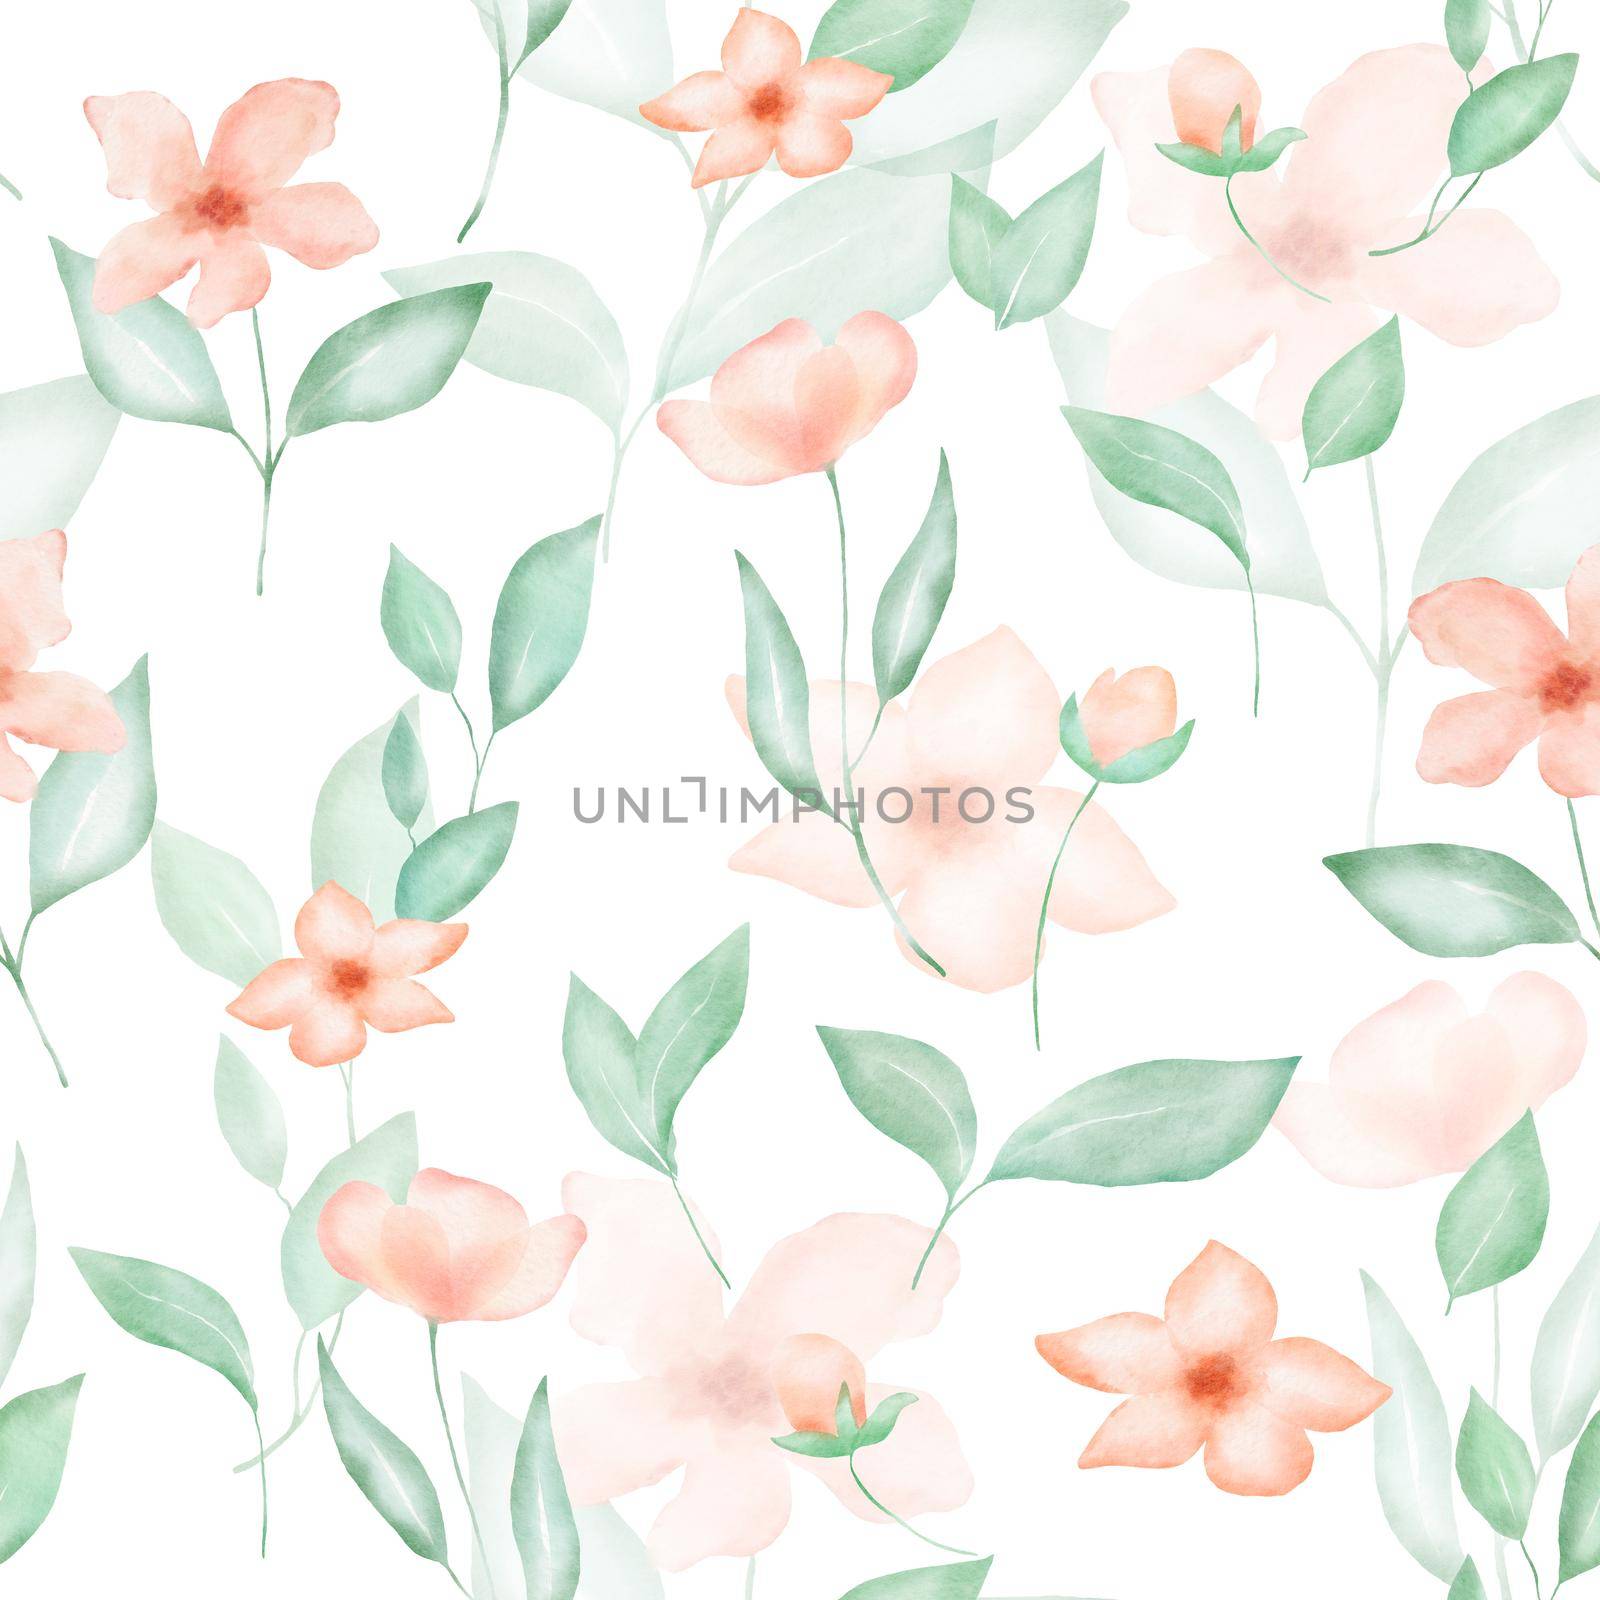 Watercolor floral seamless pattern with pink flowers and leaves. Spring colorful decor with hand drawn illustrations on white background by ElenaPlatova